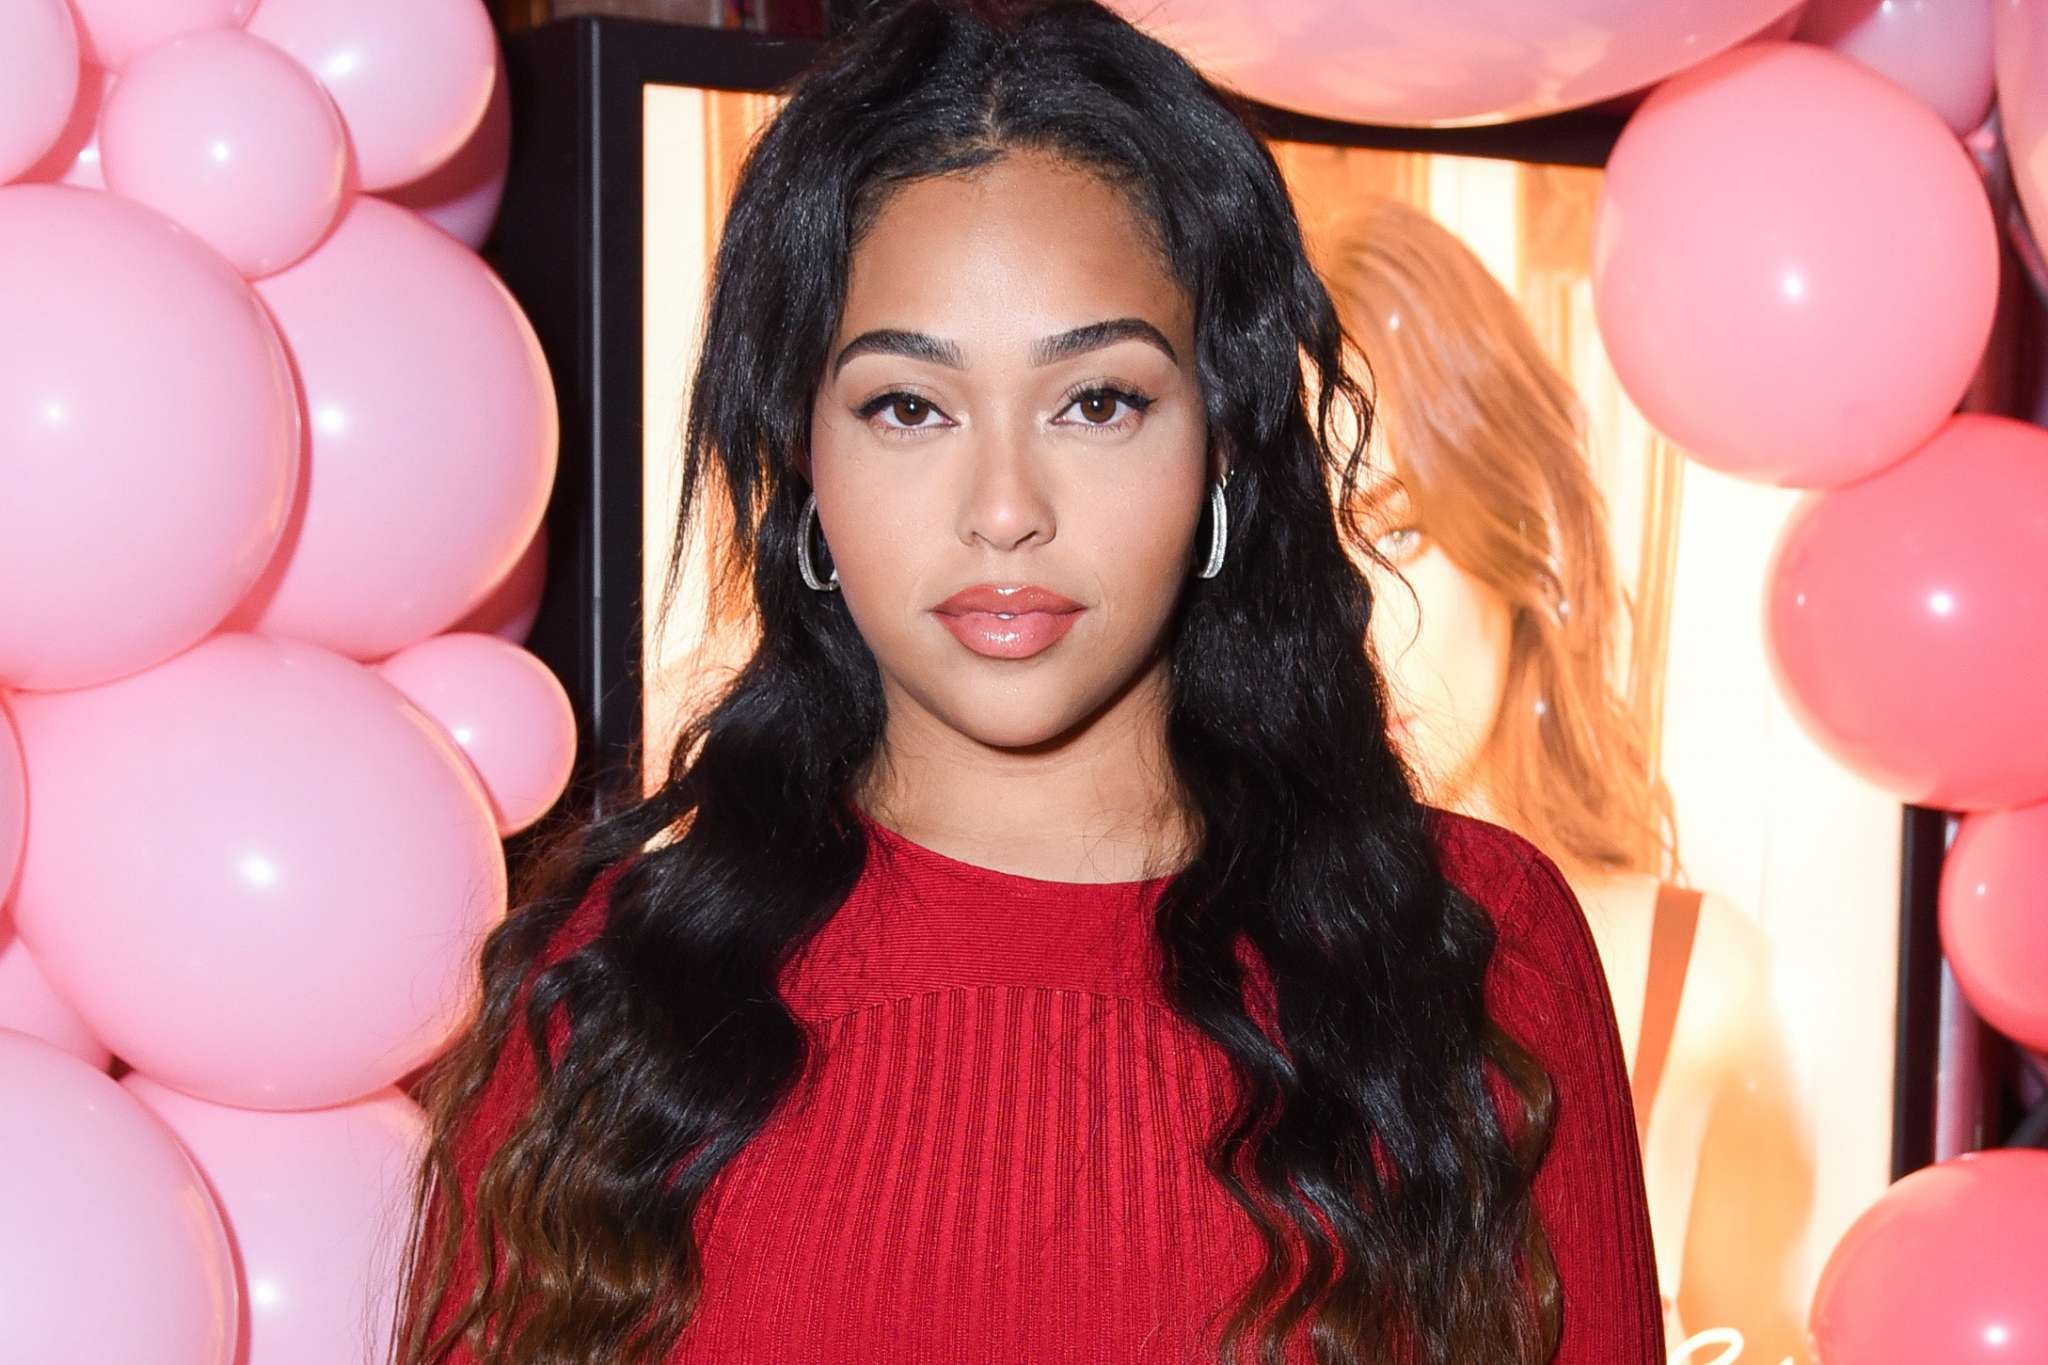 Jordyn Woods Flaunts Her Weight Loss - Check Out Her Post Here